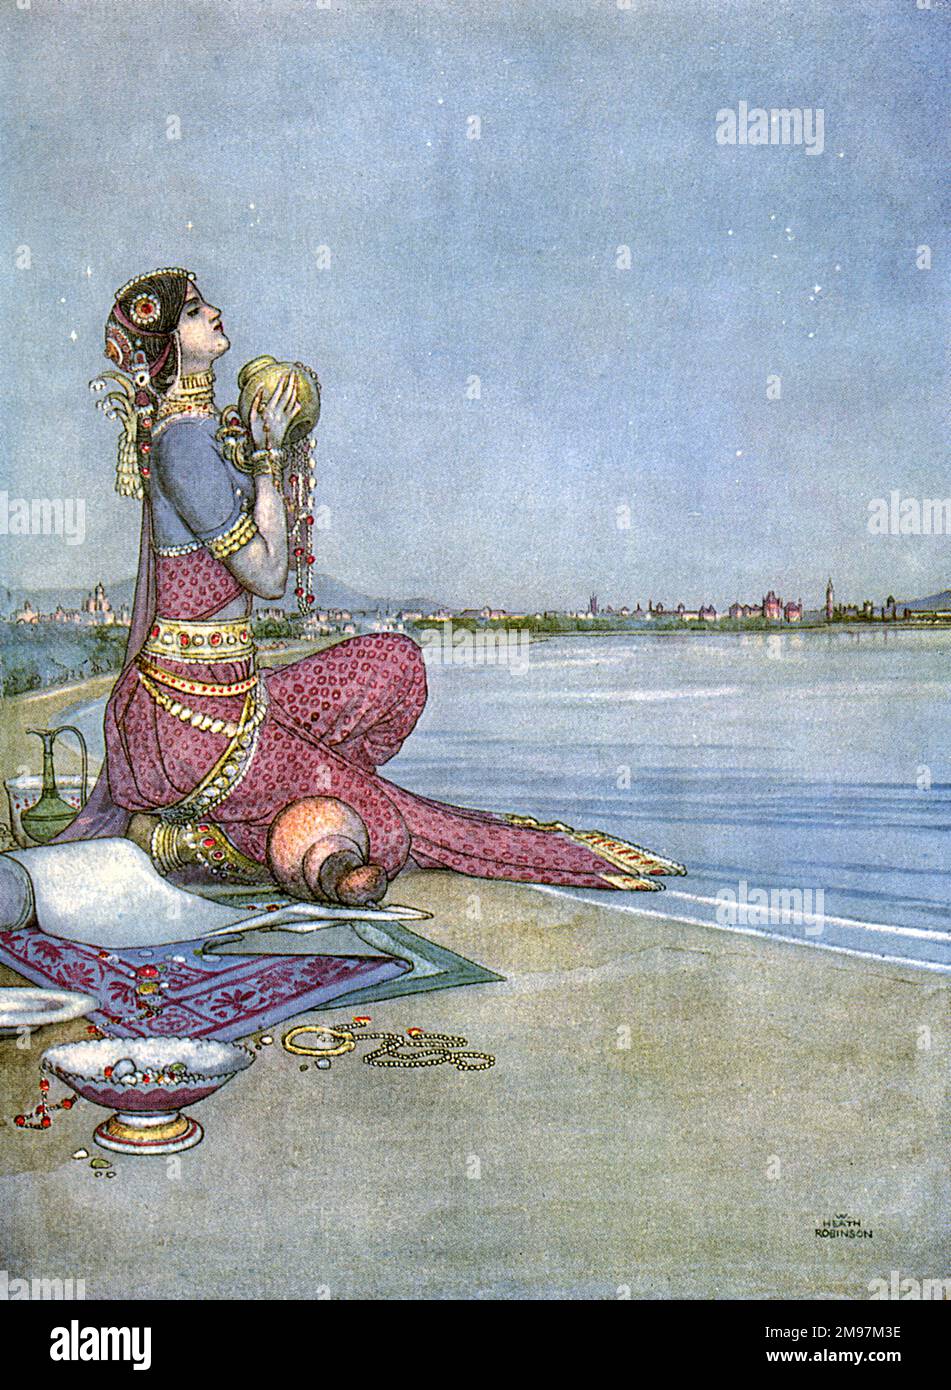 Illustration to A Song of the English, a patriotic set of poems by Rudyard Kipling (first published in the English Illustrated Magazine). Bombay -- Royal and Dower-Royal, I the Queen.  Depicting an Indian woman representing the city of Bombay, full of riches (a comment on British interests in India). Stock Photo